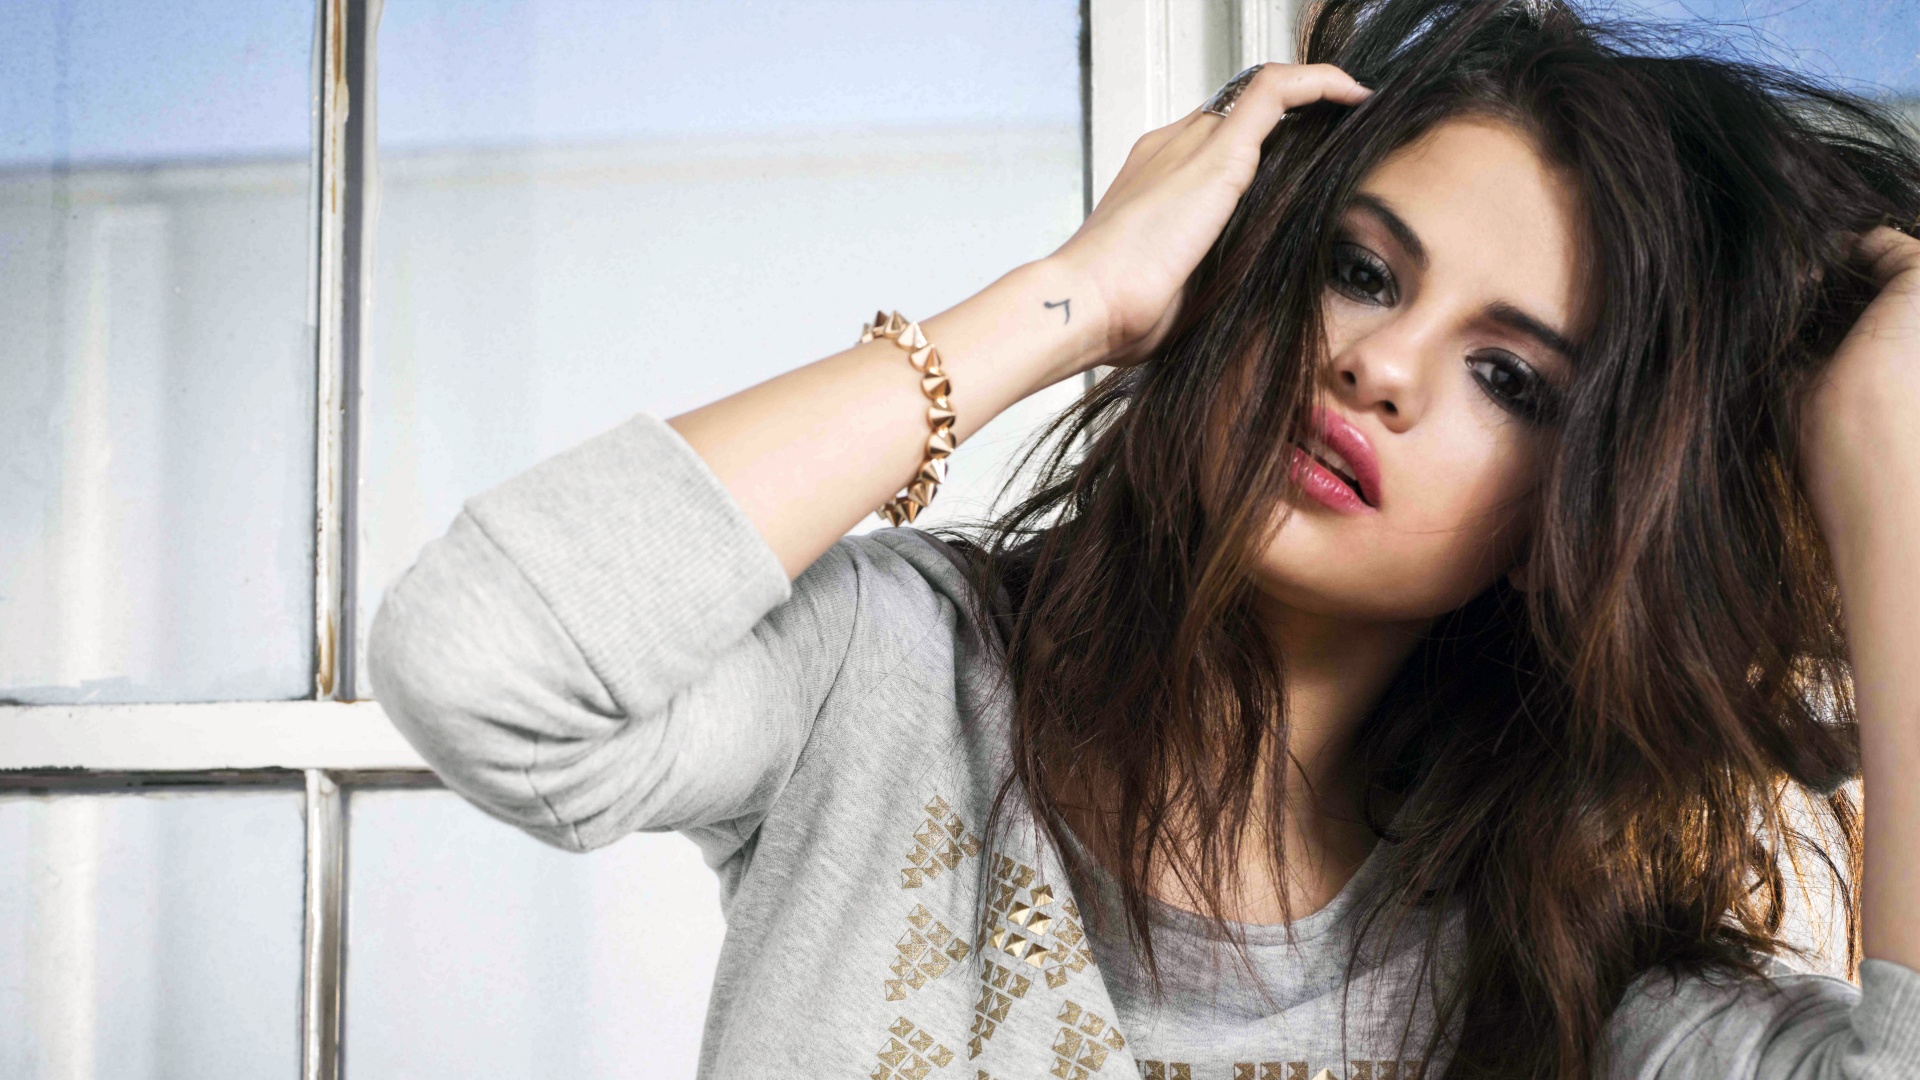 selena gomez pictures hd A35